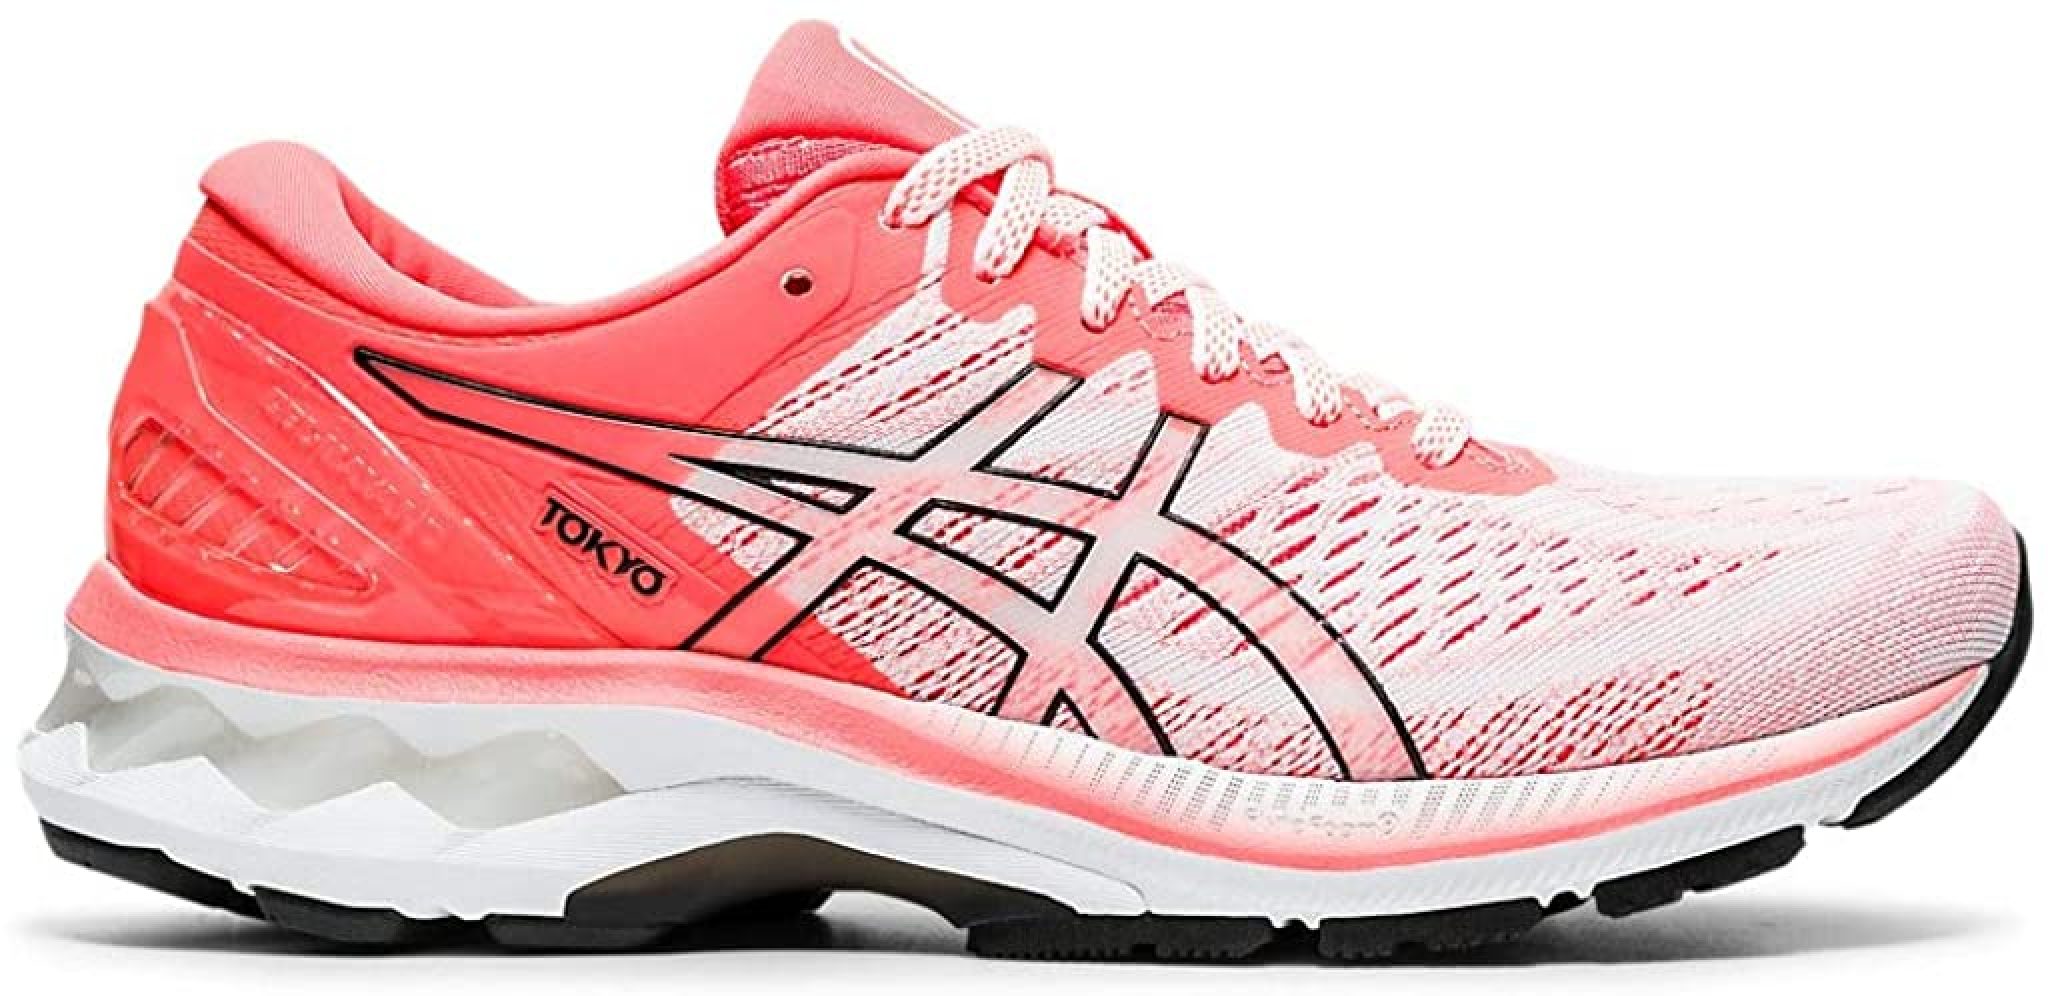 Best ASICS shoes for Overpronation | Sole of Athletes